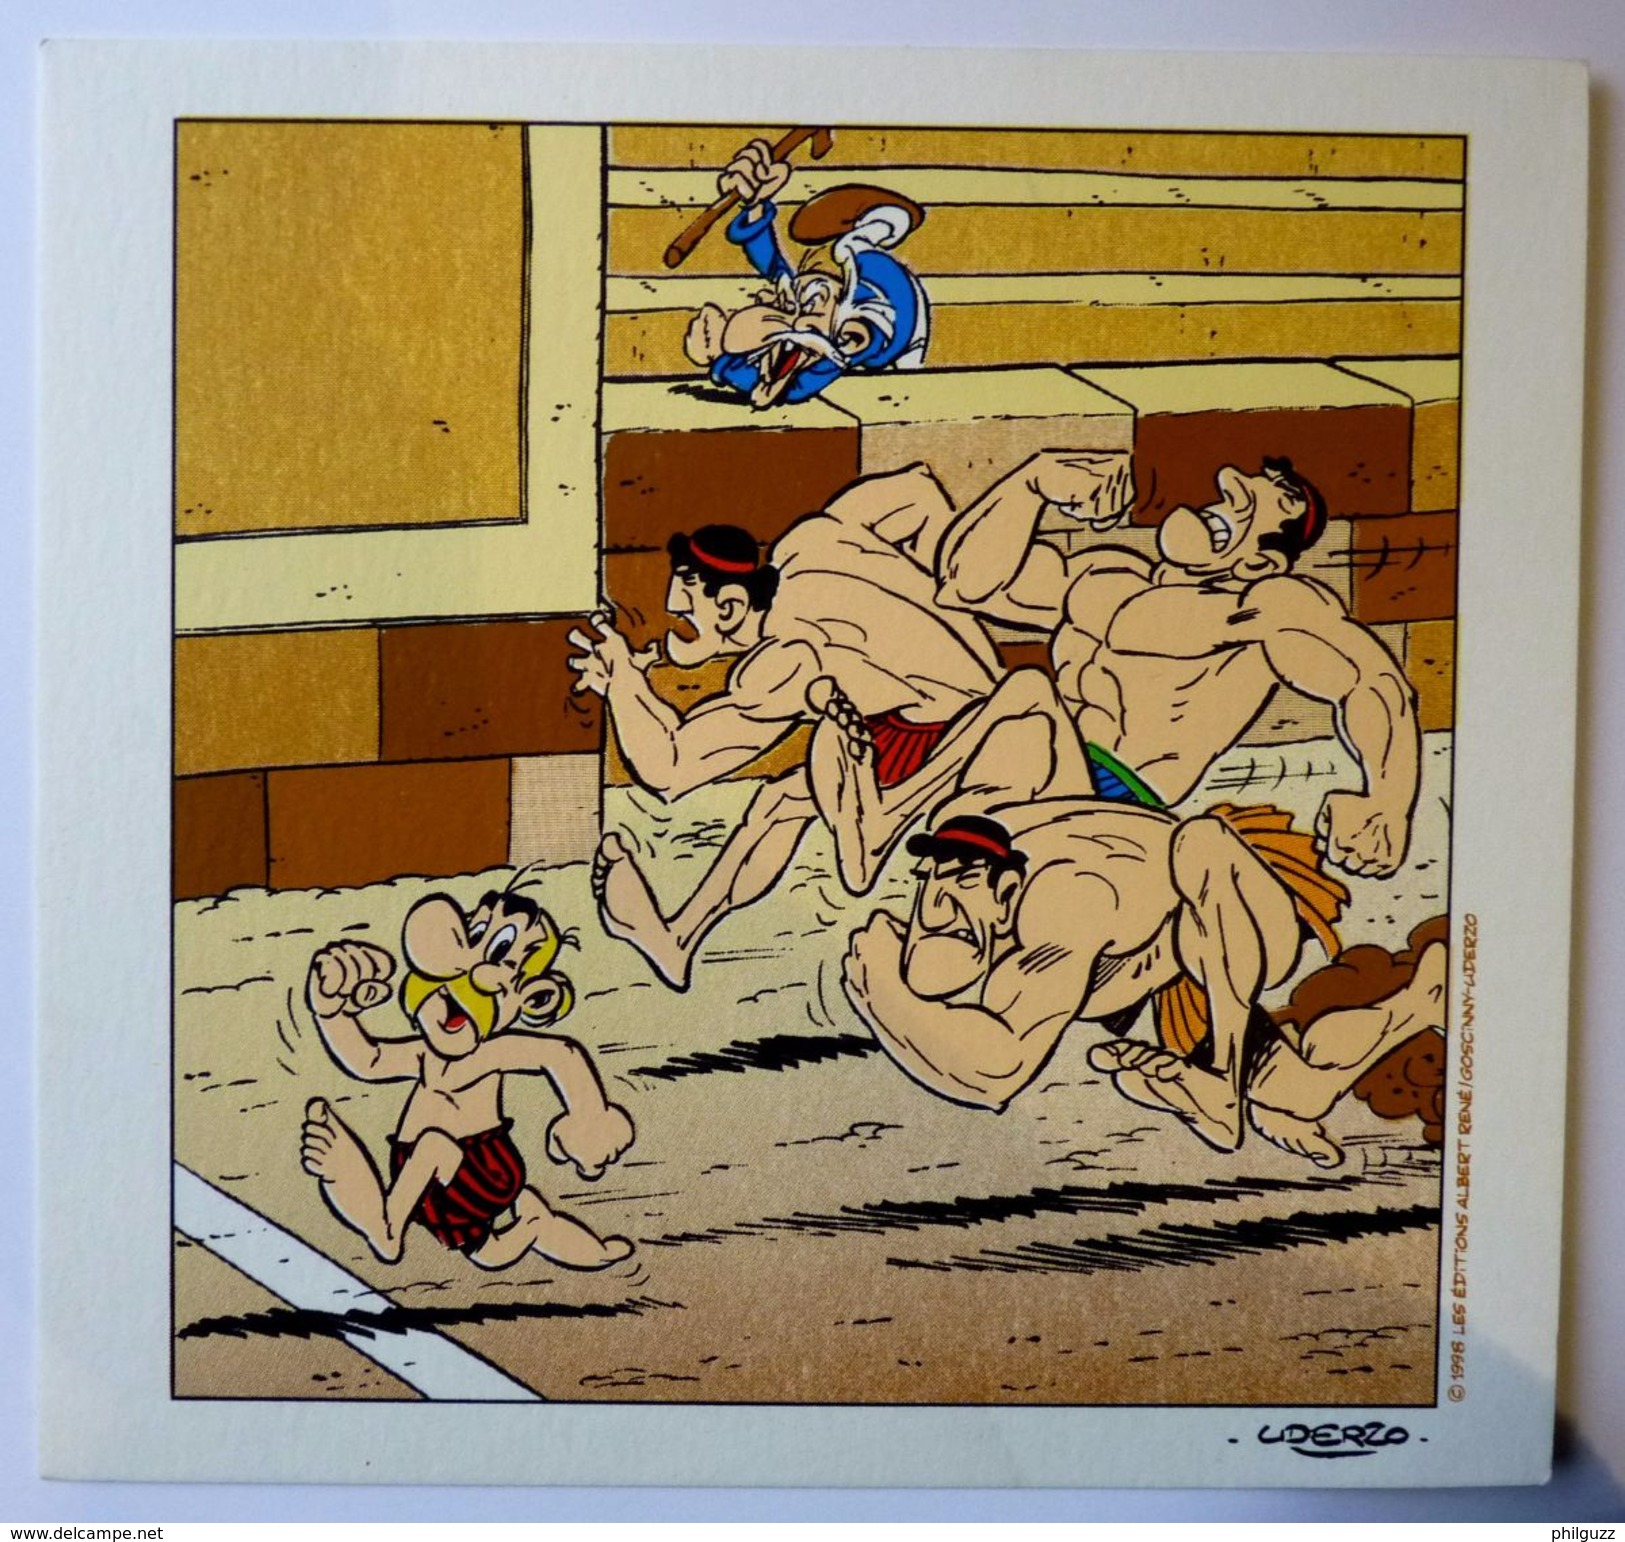 SERIGRAPHIE TDK ASTERIX AUX JEUX OLYMPIQUES 1998 - Serigraphies & Lithographies